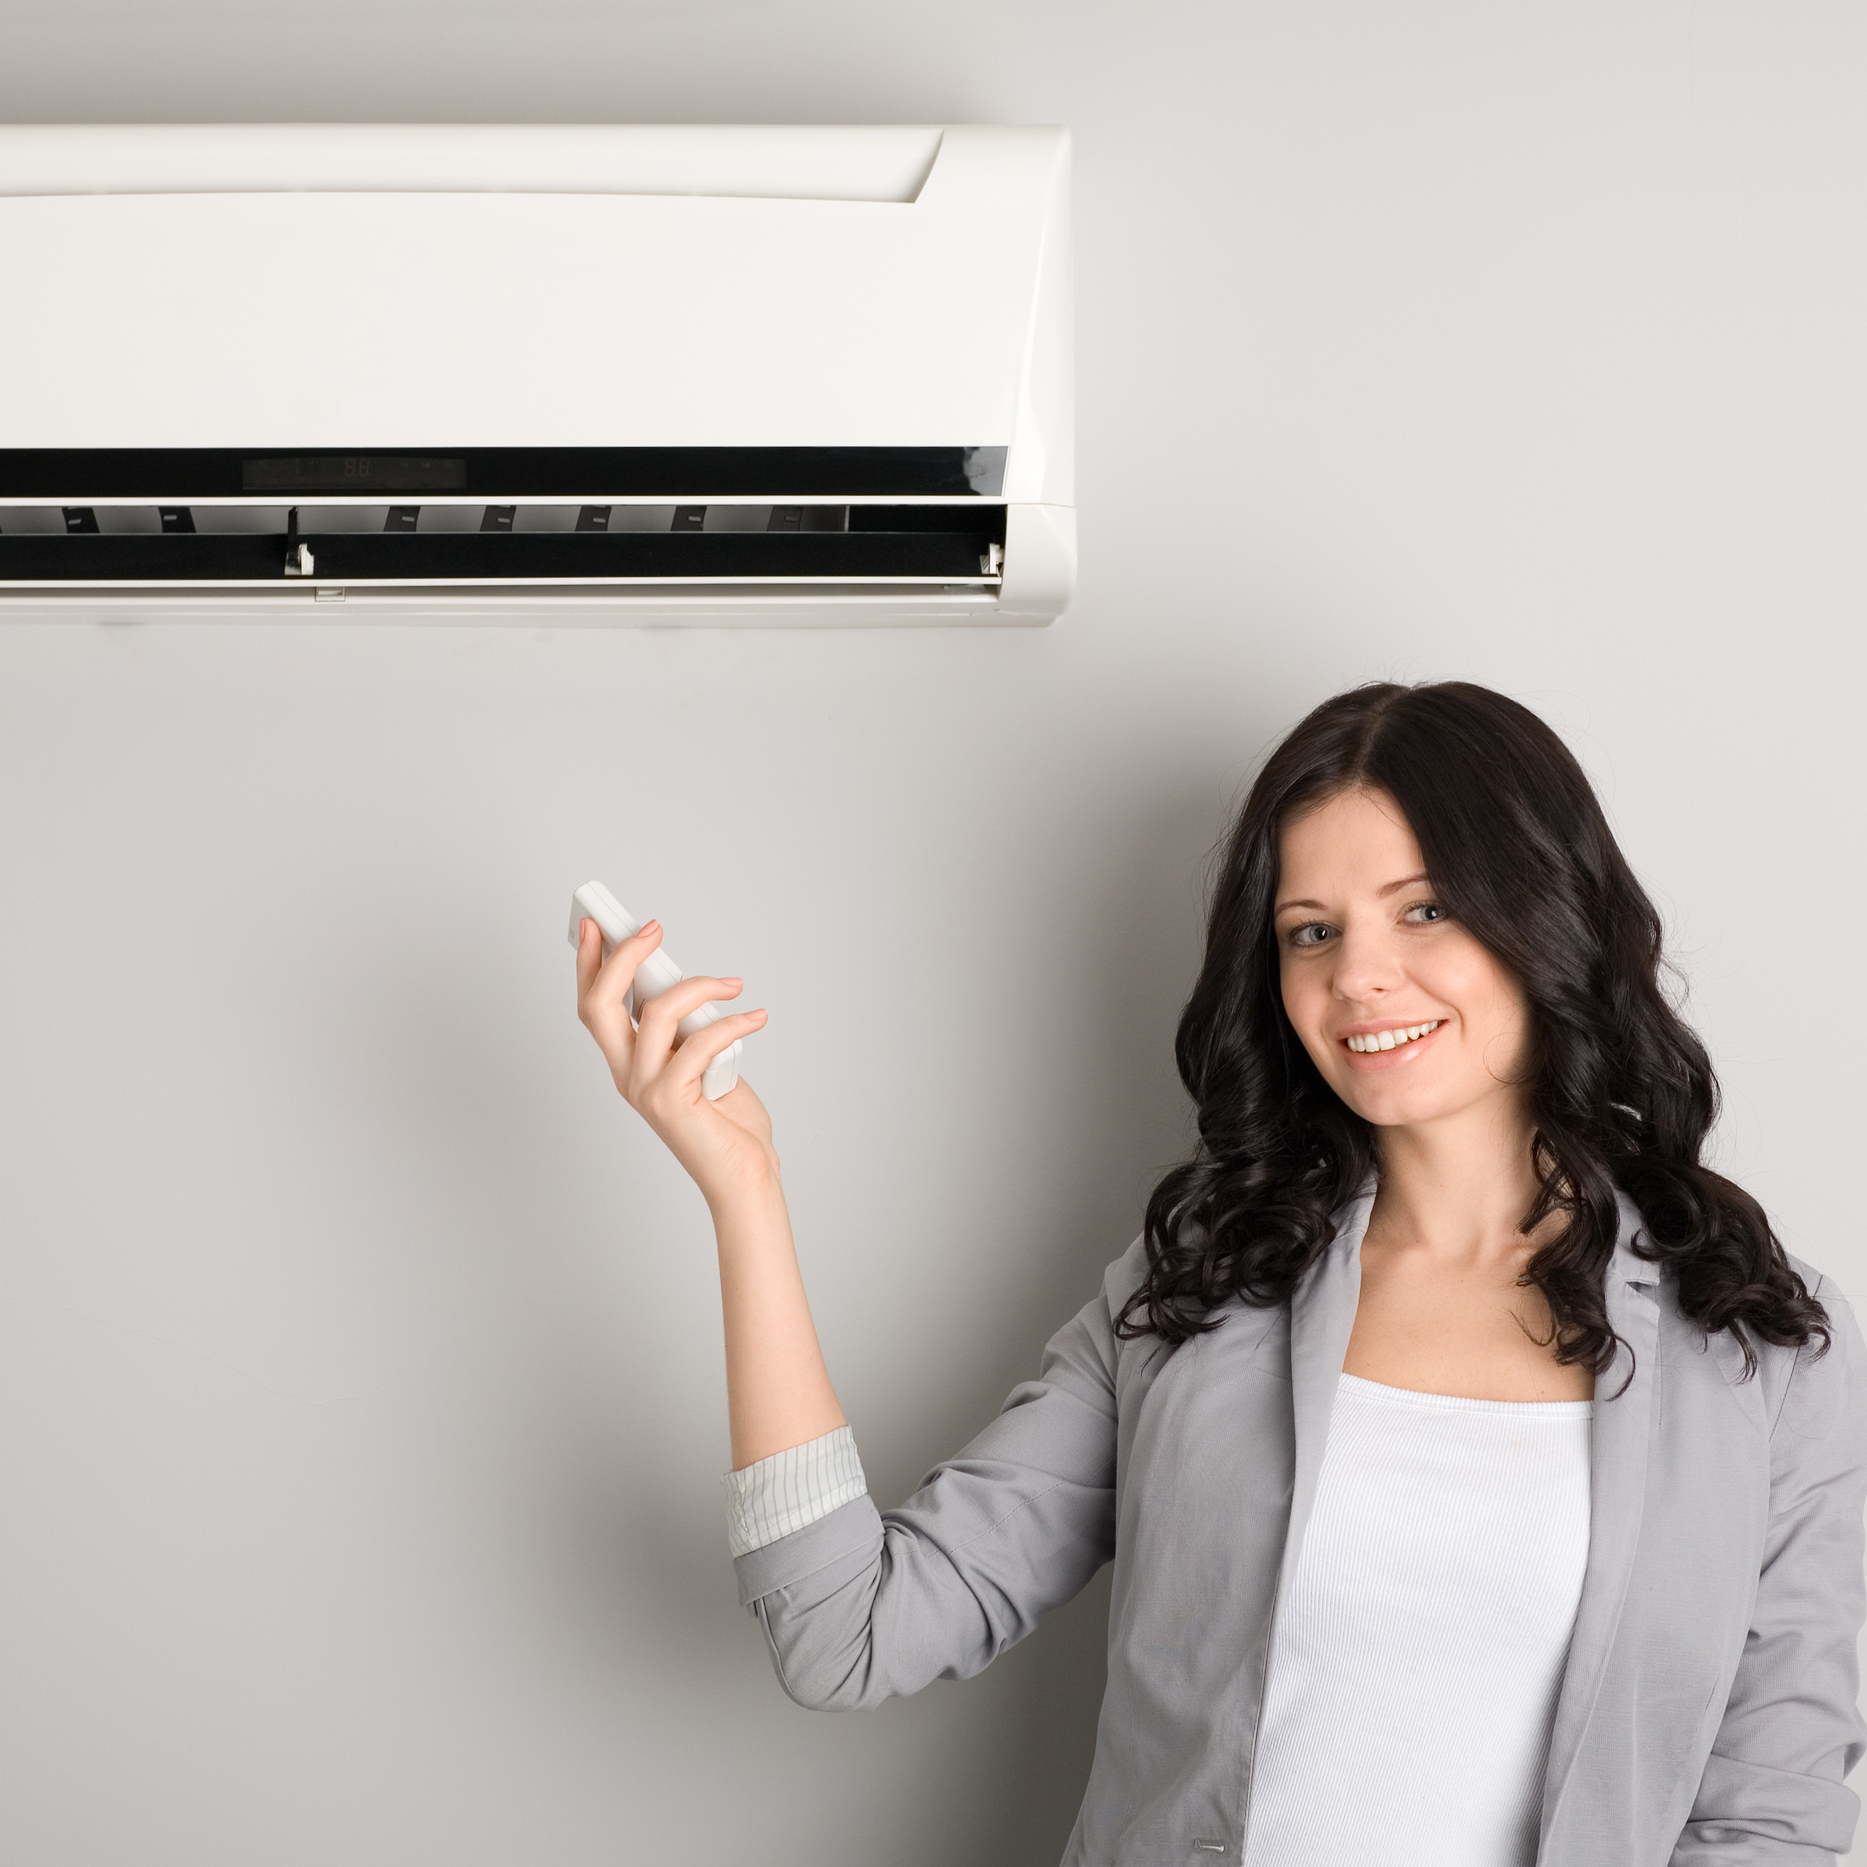 We specialize in Ductless AC to keep your home comfortable in St. George UT.